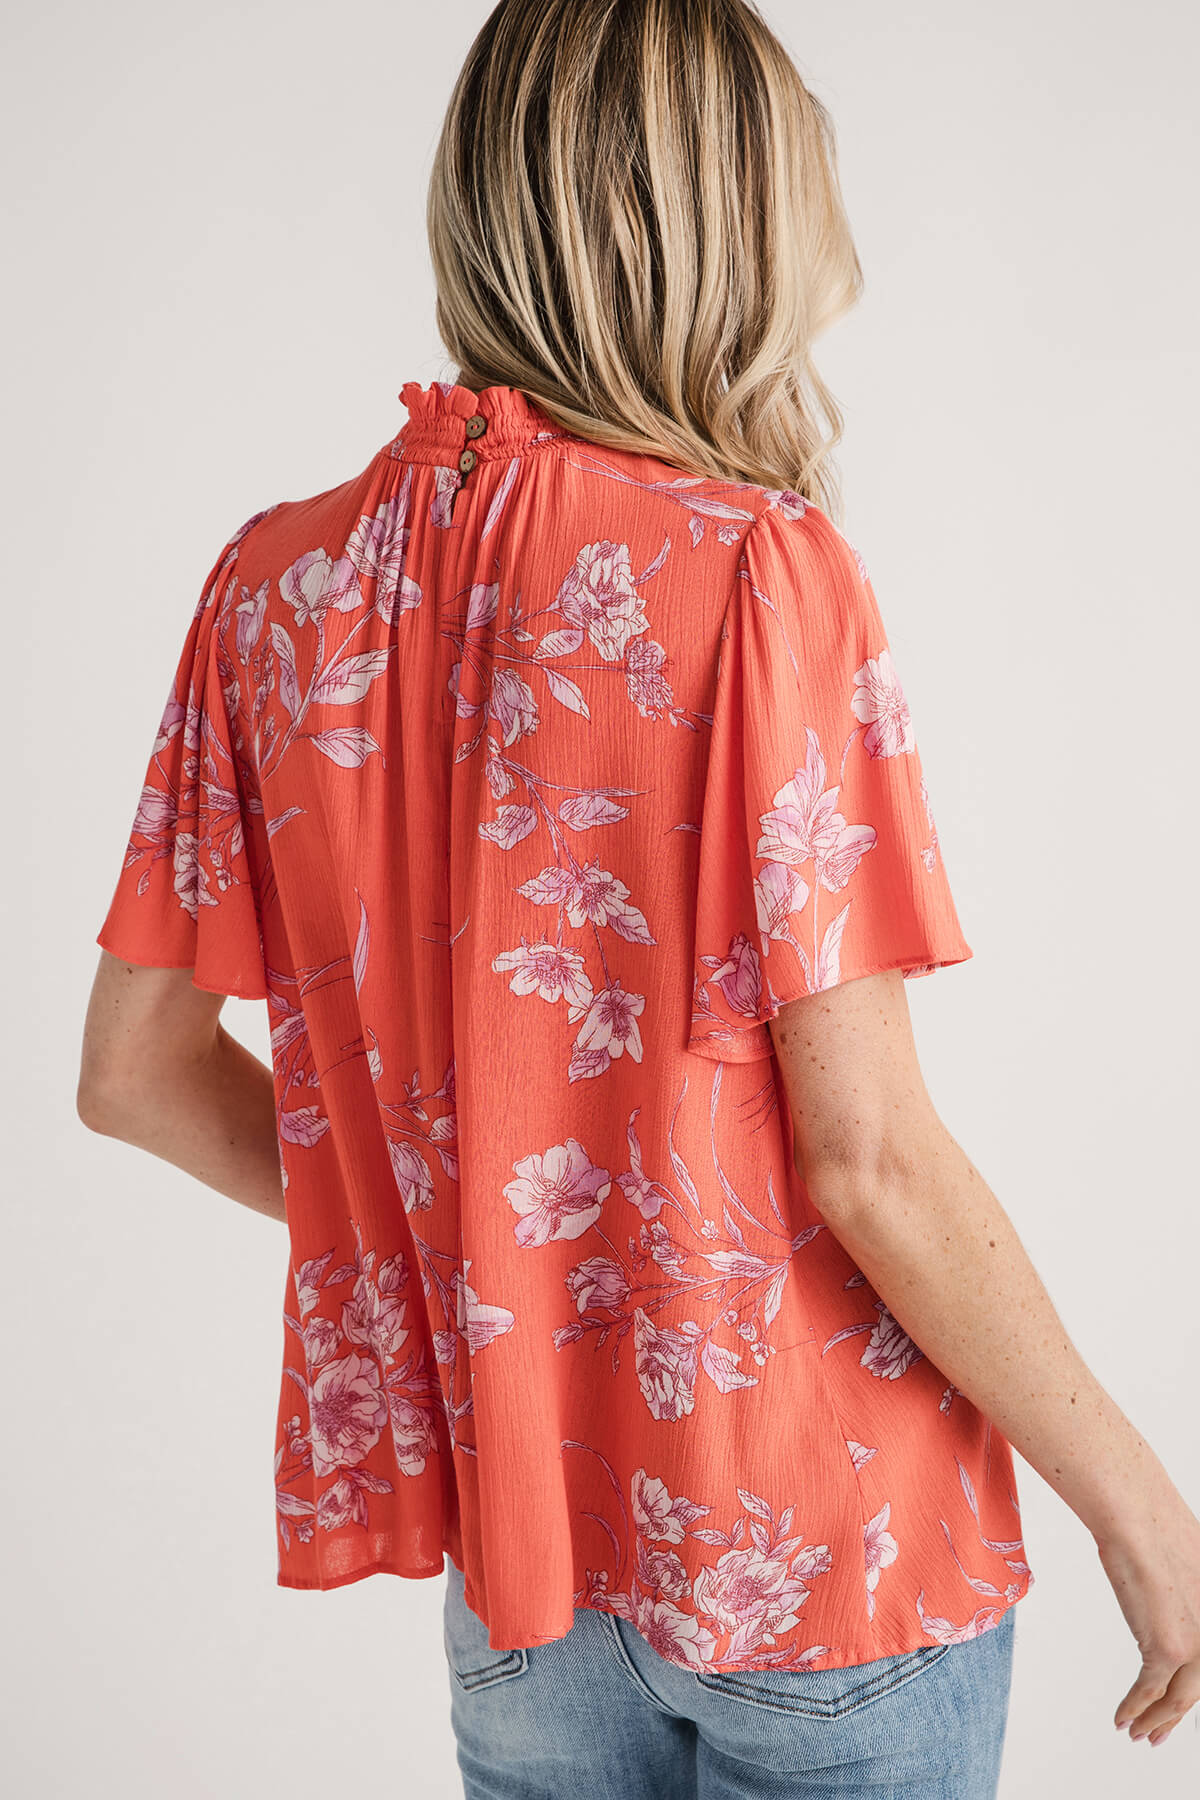 Easel Floral Printed Rayon Gauze Woven Top